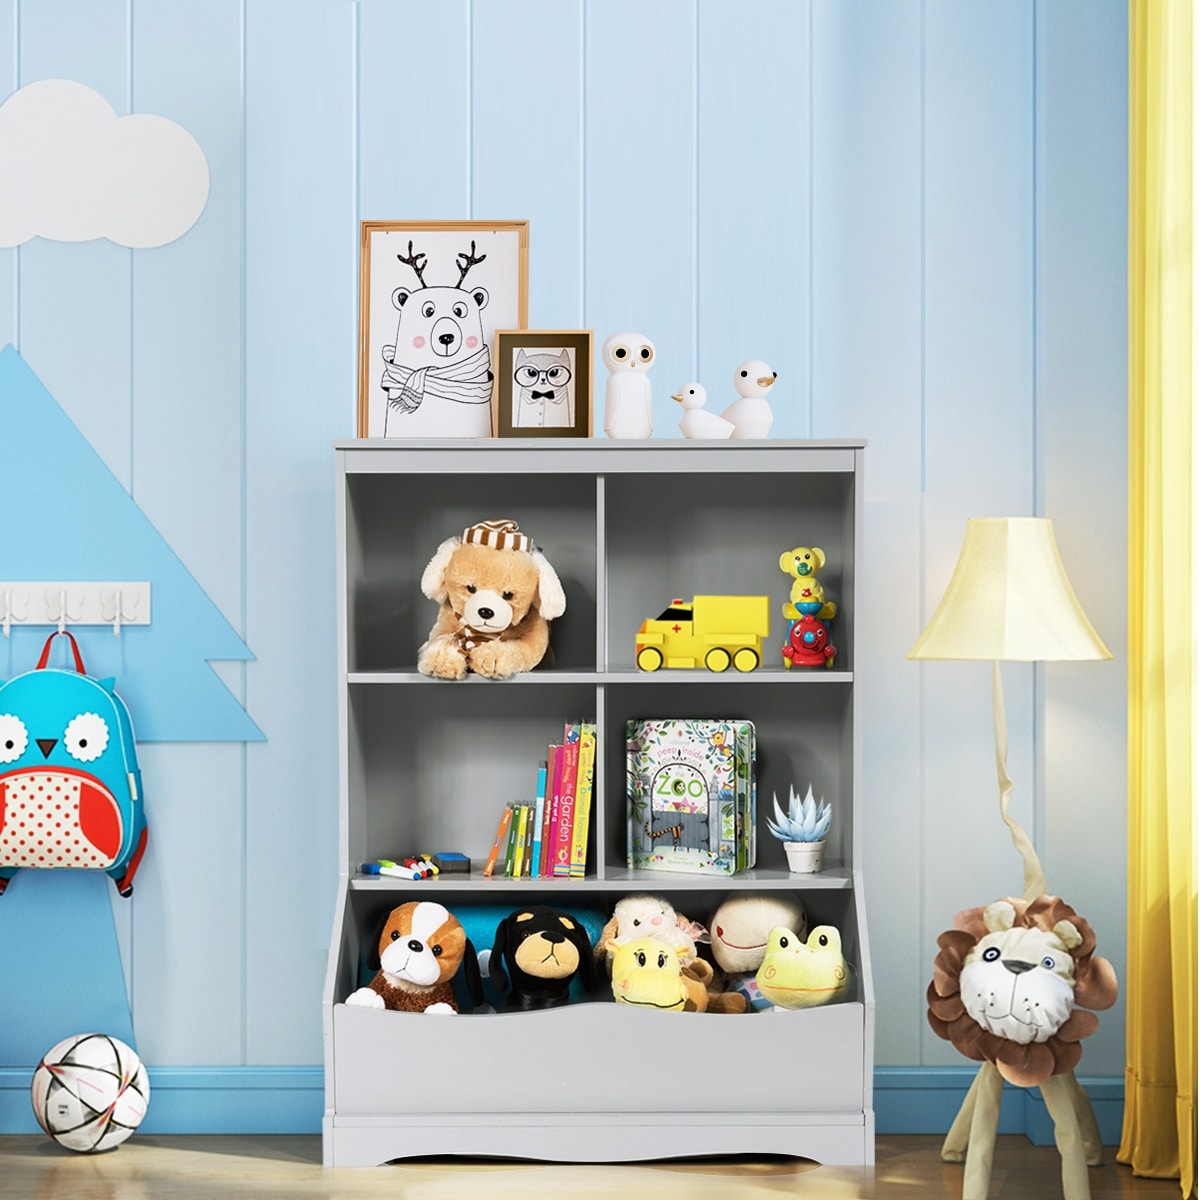 https://ak1.ostkcdn.com/images/products/is/images/direct/f5b8976fbe89128a6df748150d471addfe0cbcd1/Costway-3-Tier-Children%27s-Multi-Functional-Bookcase-Toy-Storage-Bin.jpg